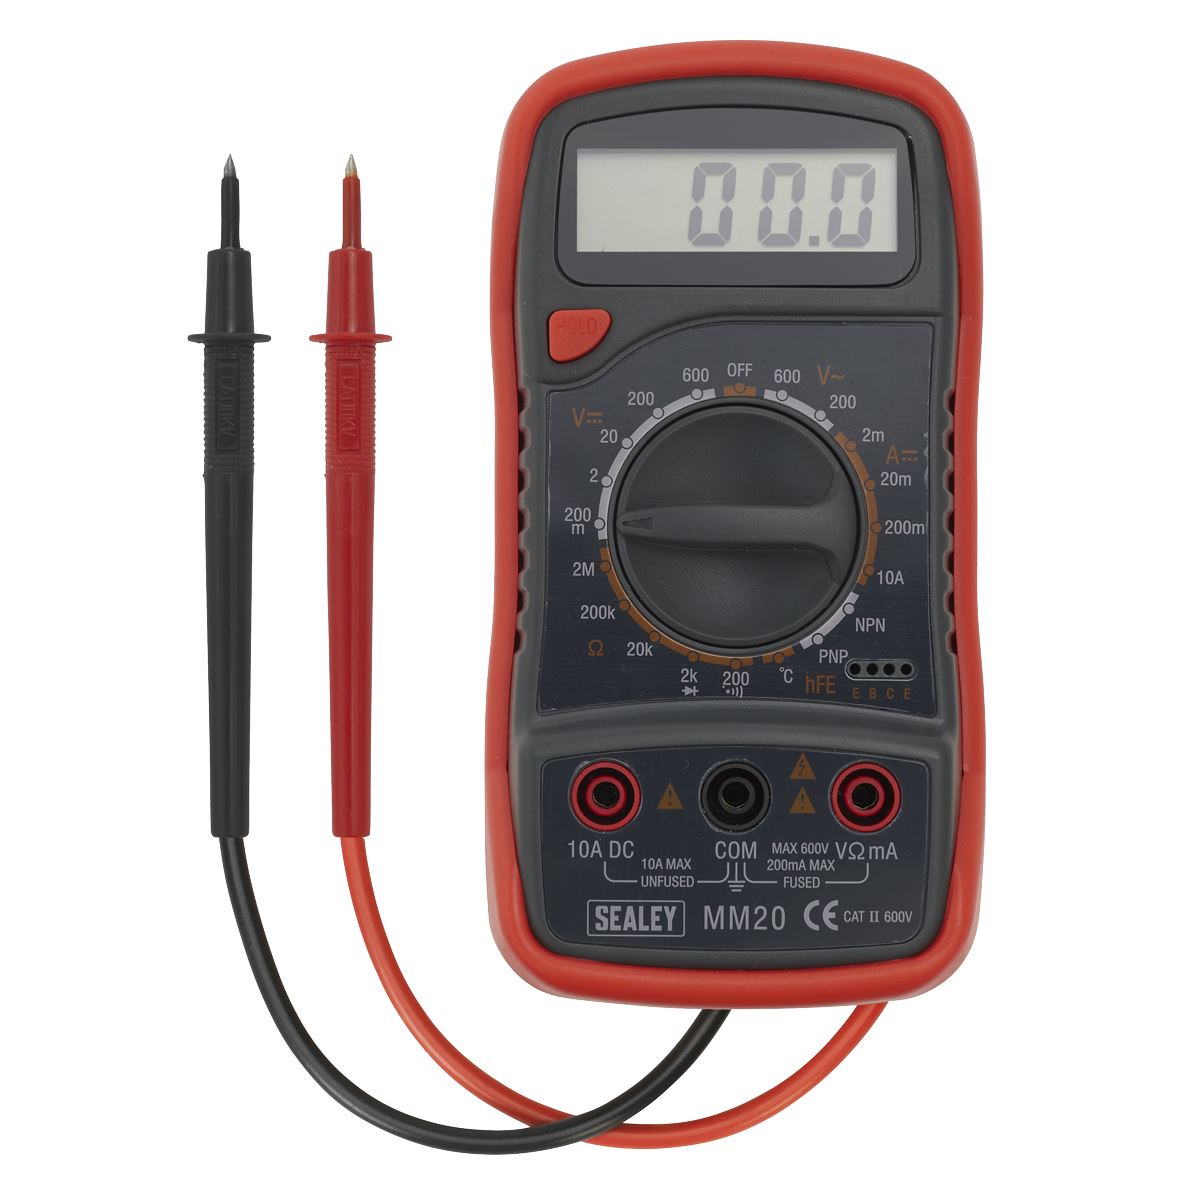 Sealey Digital Multimeter 8-Function with Thermocouple MM20